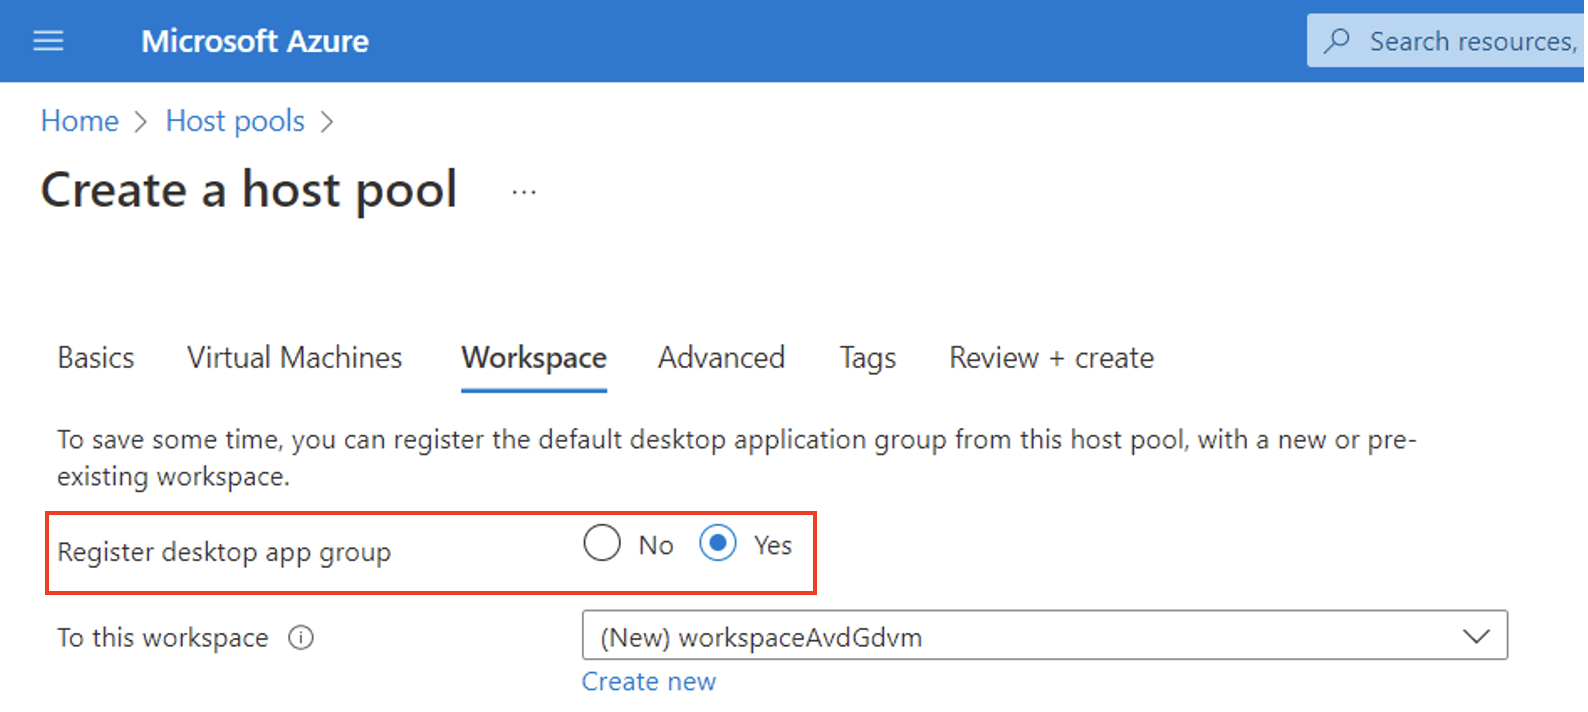 Screenshot showing to select yes to register a desktop app group